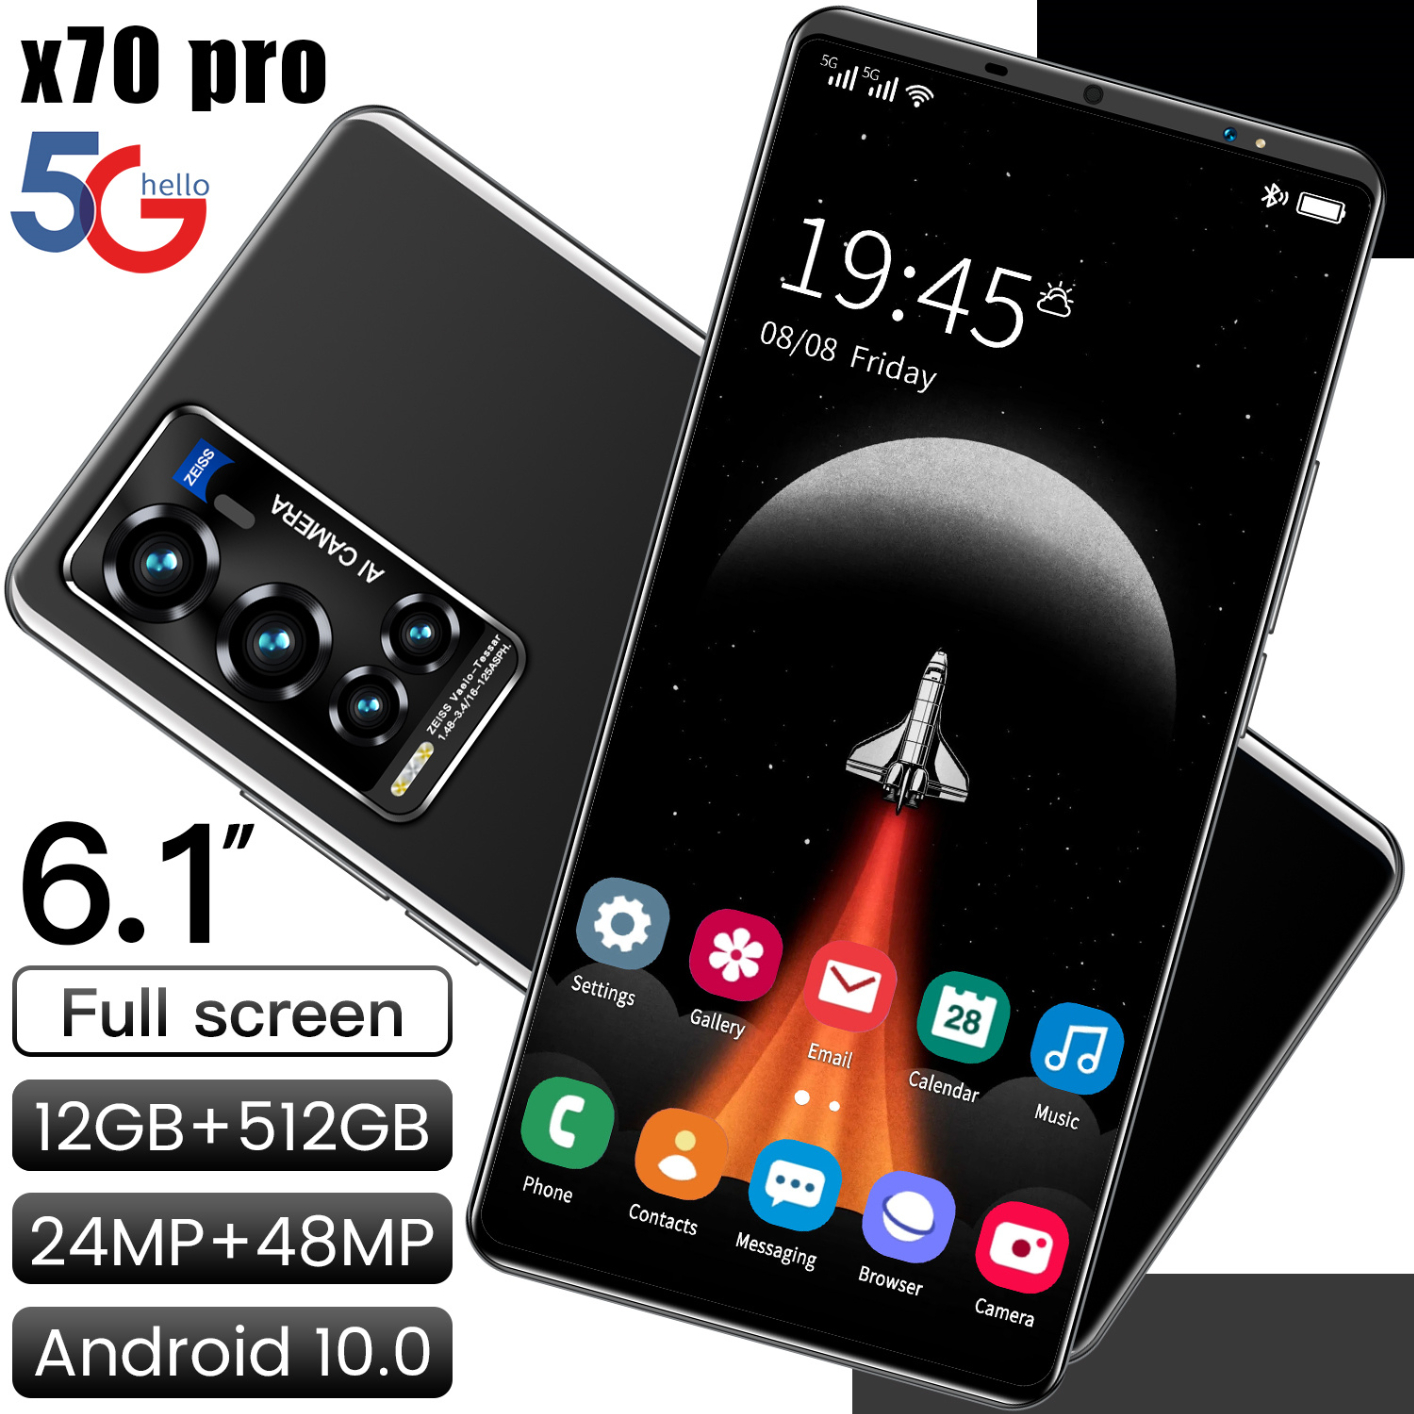 X70 Pro 6.1 inch Android smartphone